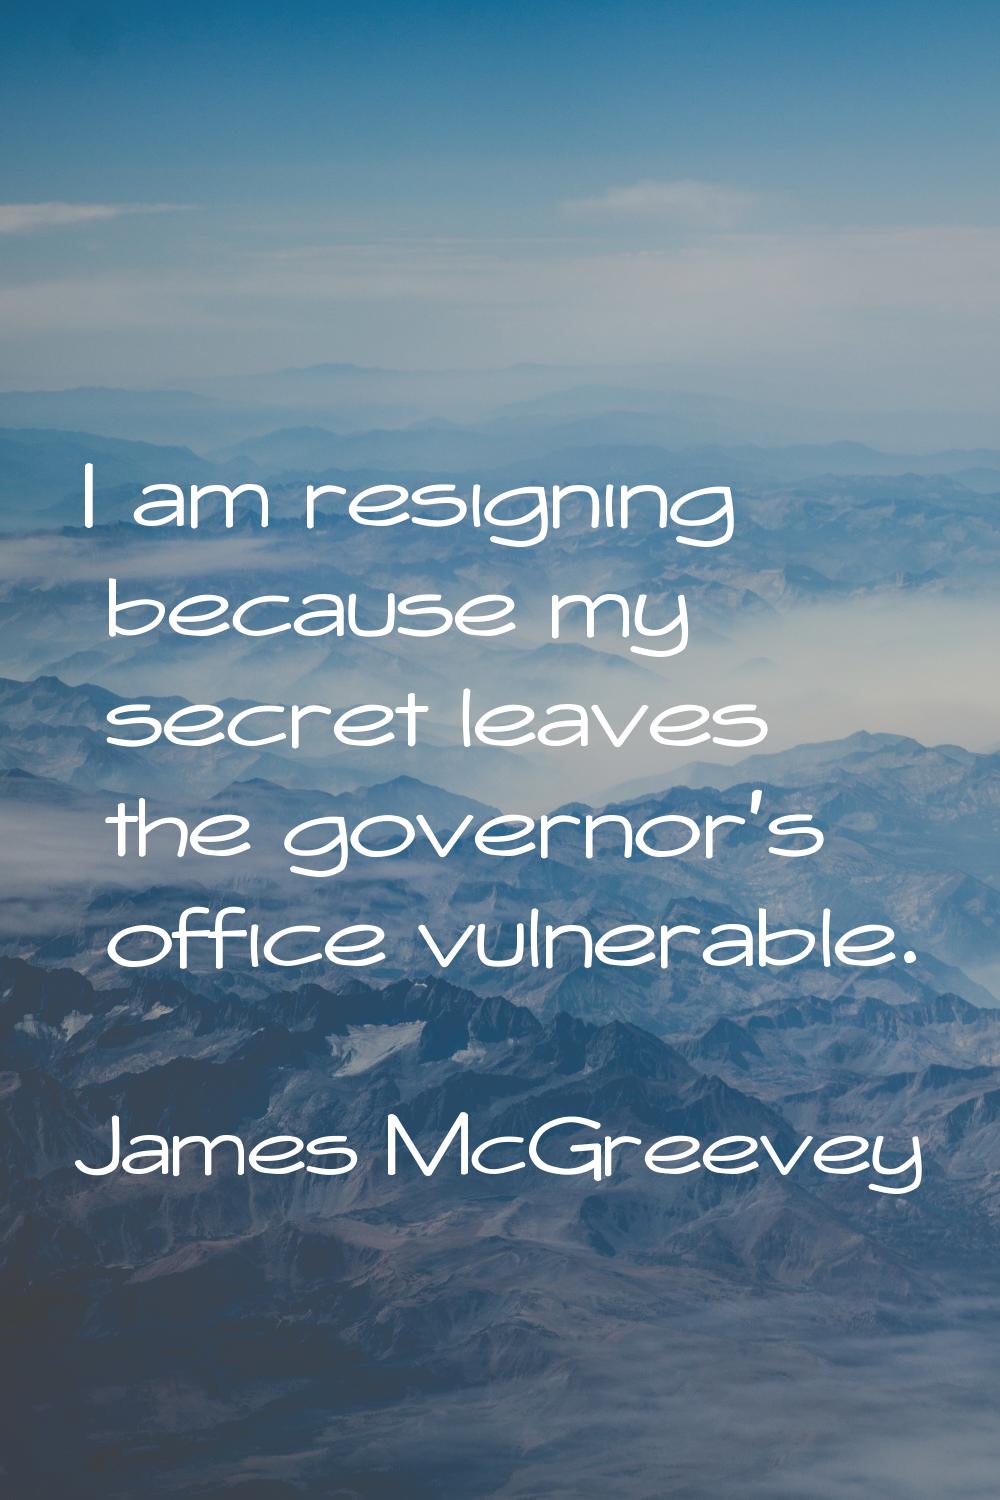 I am resigning because my secret leaves the governor's office vulnerable.